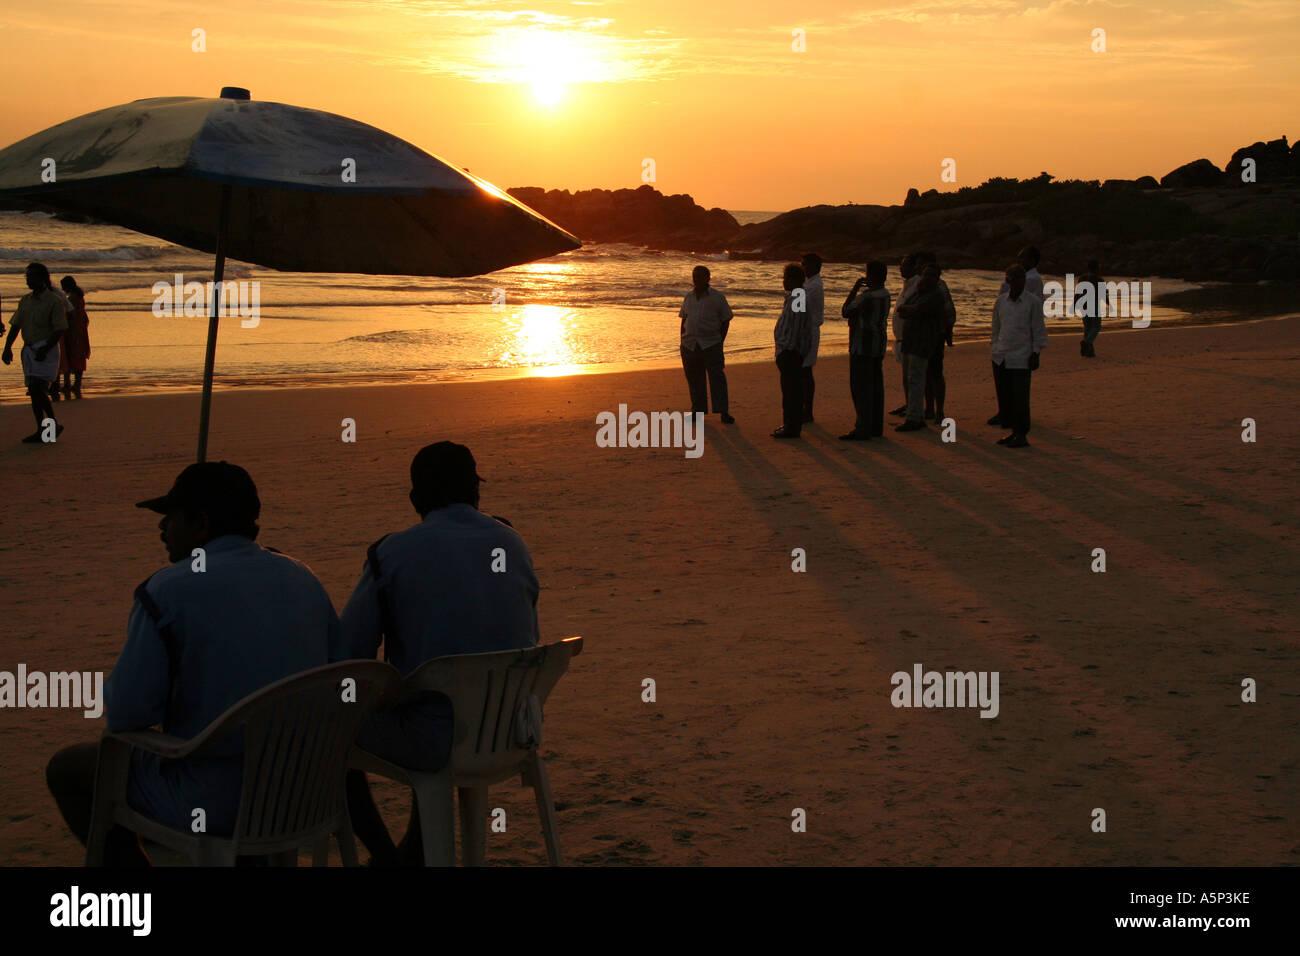 Men on the beach at sunset, Kovalam, southern india. Stock Photo